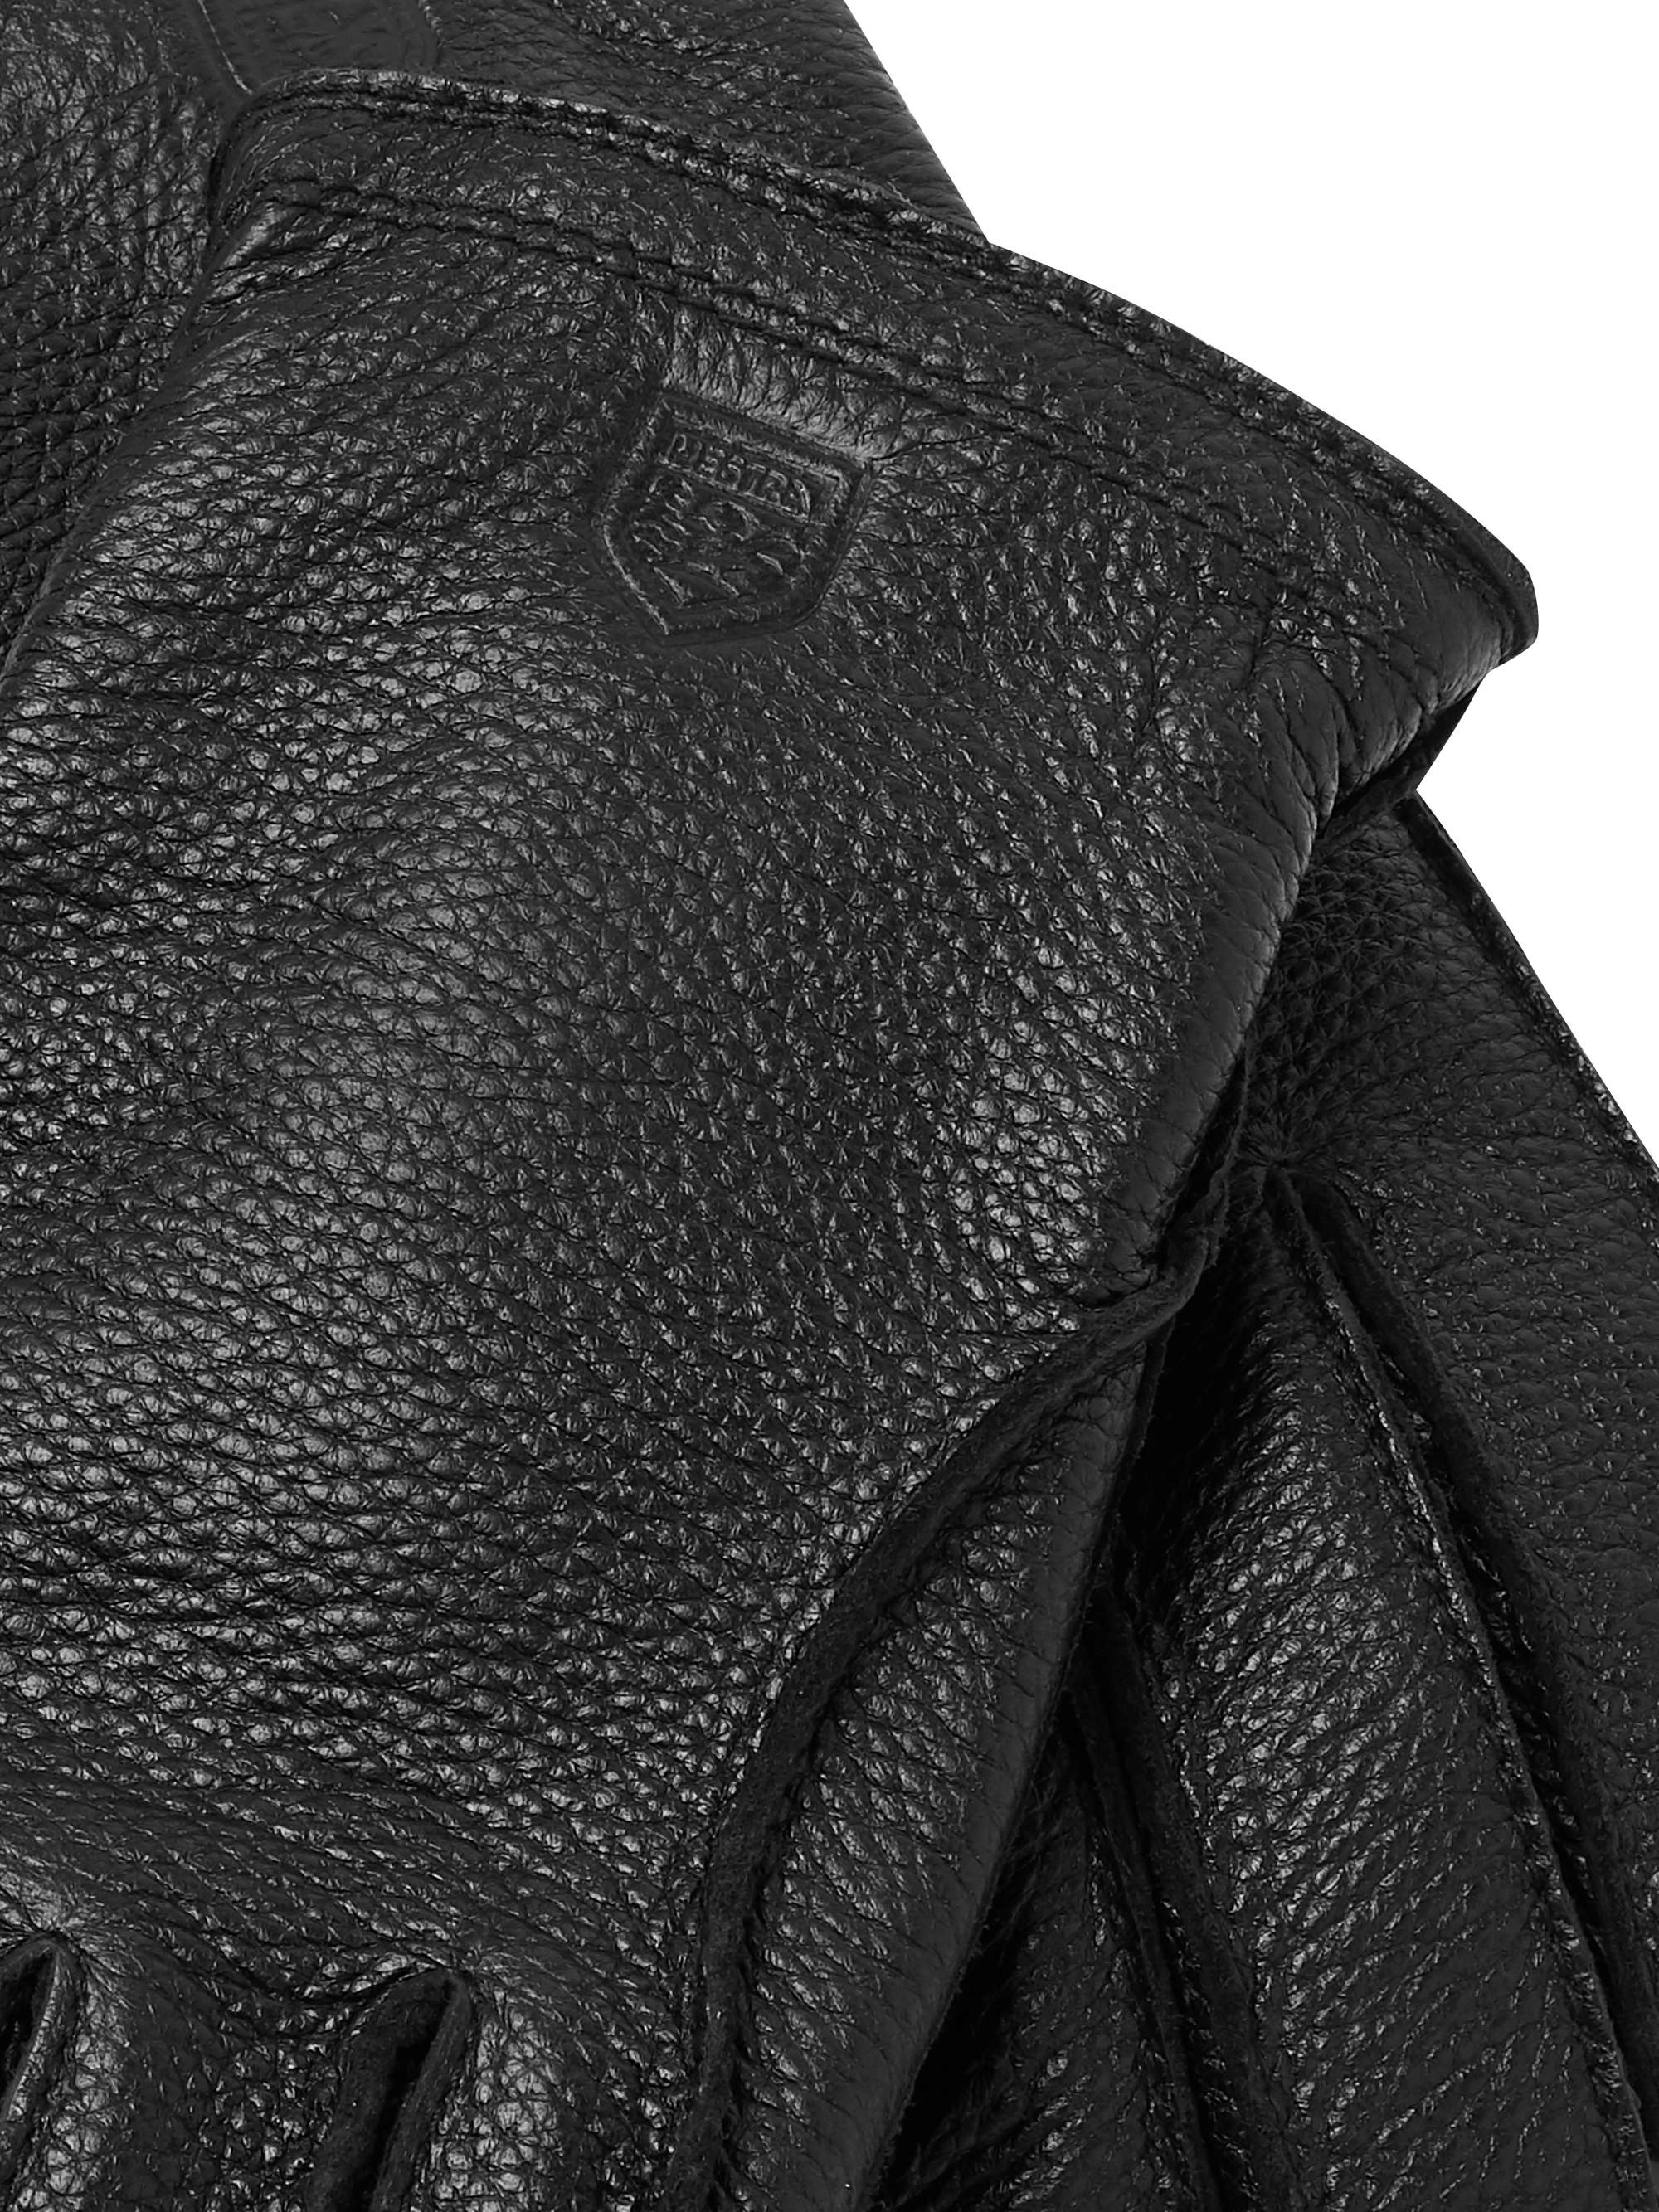 HESTRA Frode Wool-Lined Full-Grain Leather Gloves